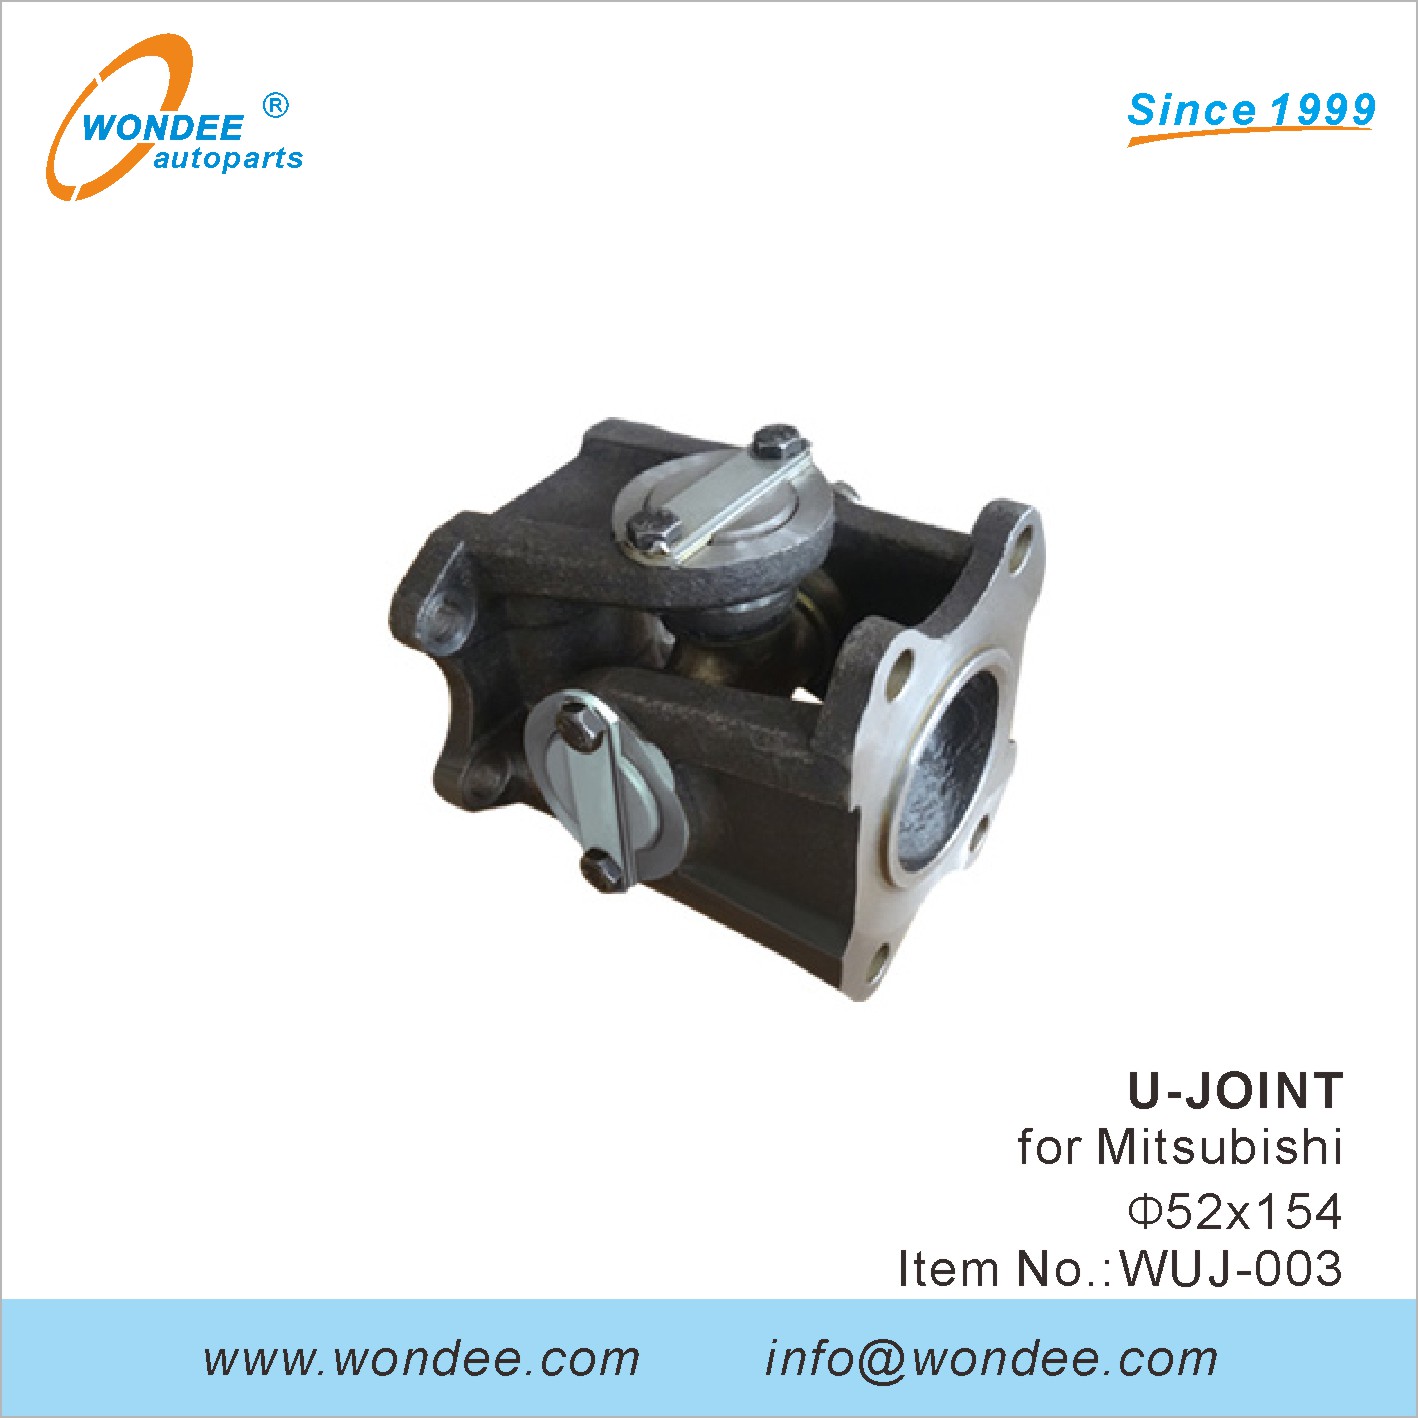 Different Types of Prop Shaft and U-Joints for Trucks